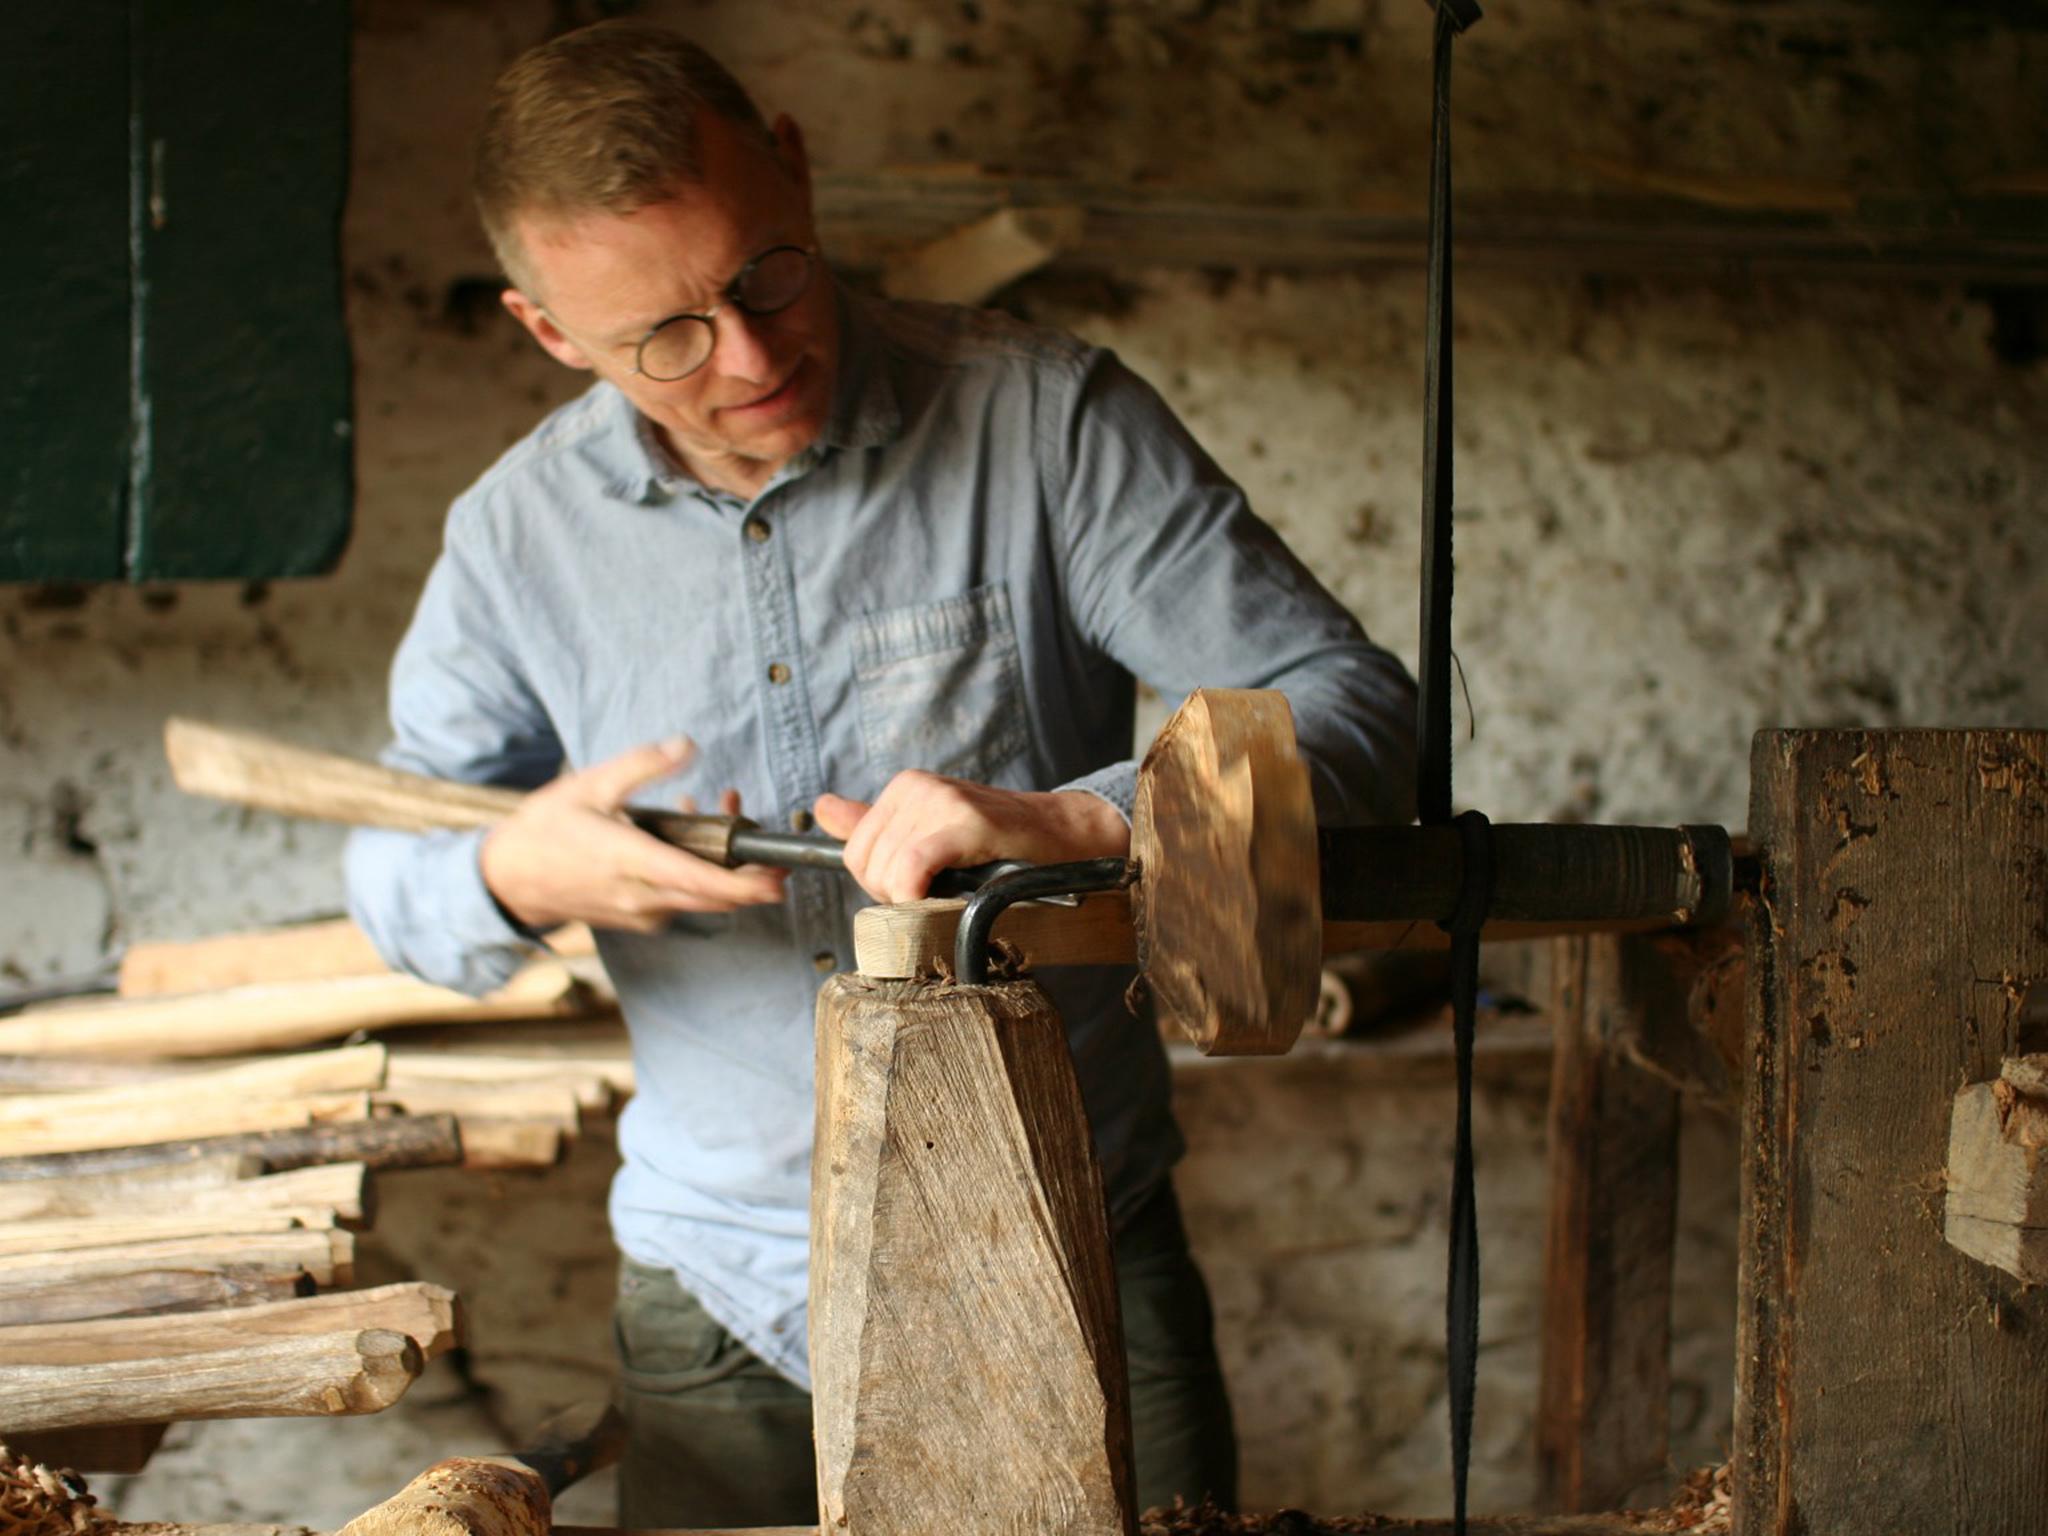 Wood learned the craft of woodturning on a pole lathe by studying George Lailey's lathe at the Museum of Rural Life in Reading